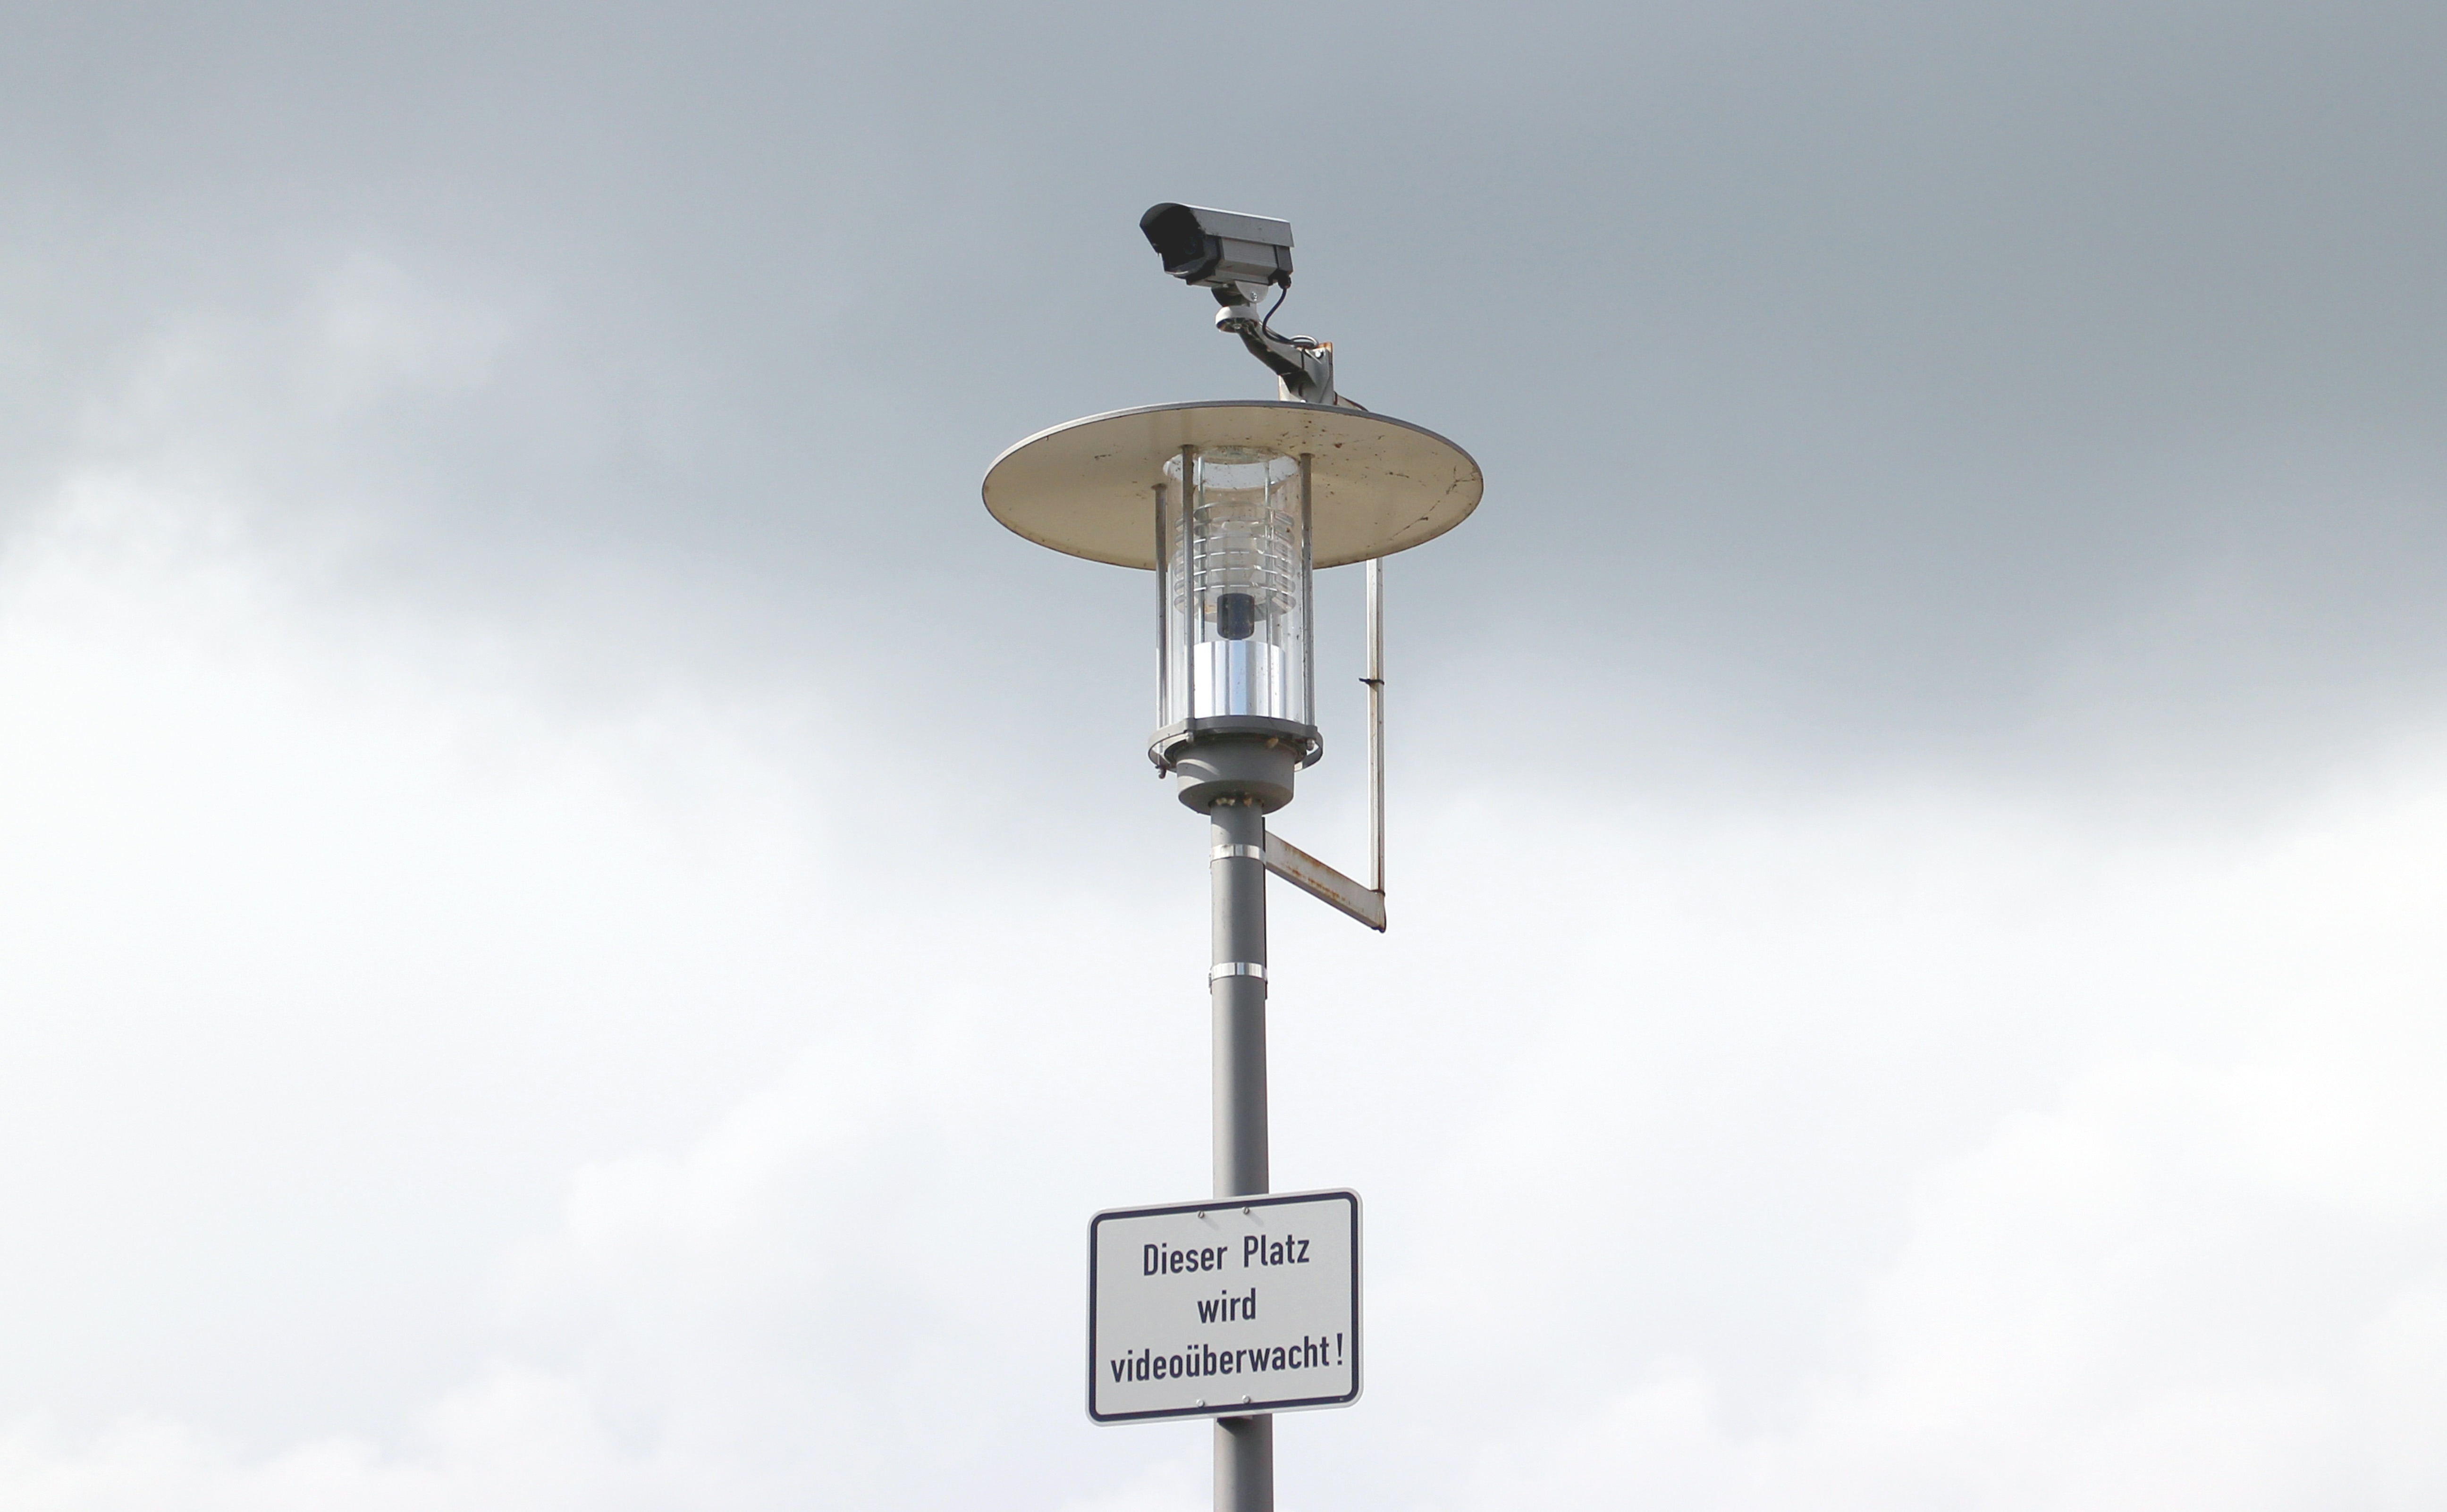 gray-and-beige solar street light with cctv camera